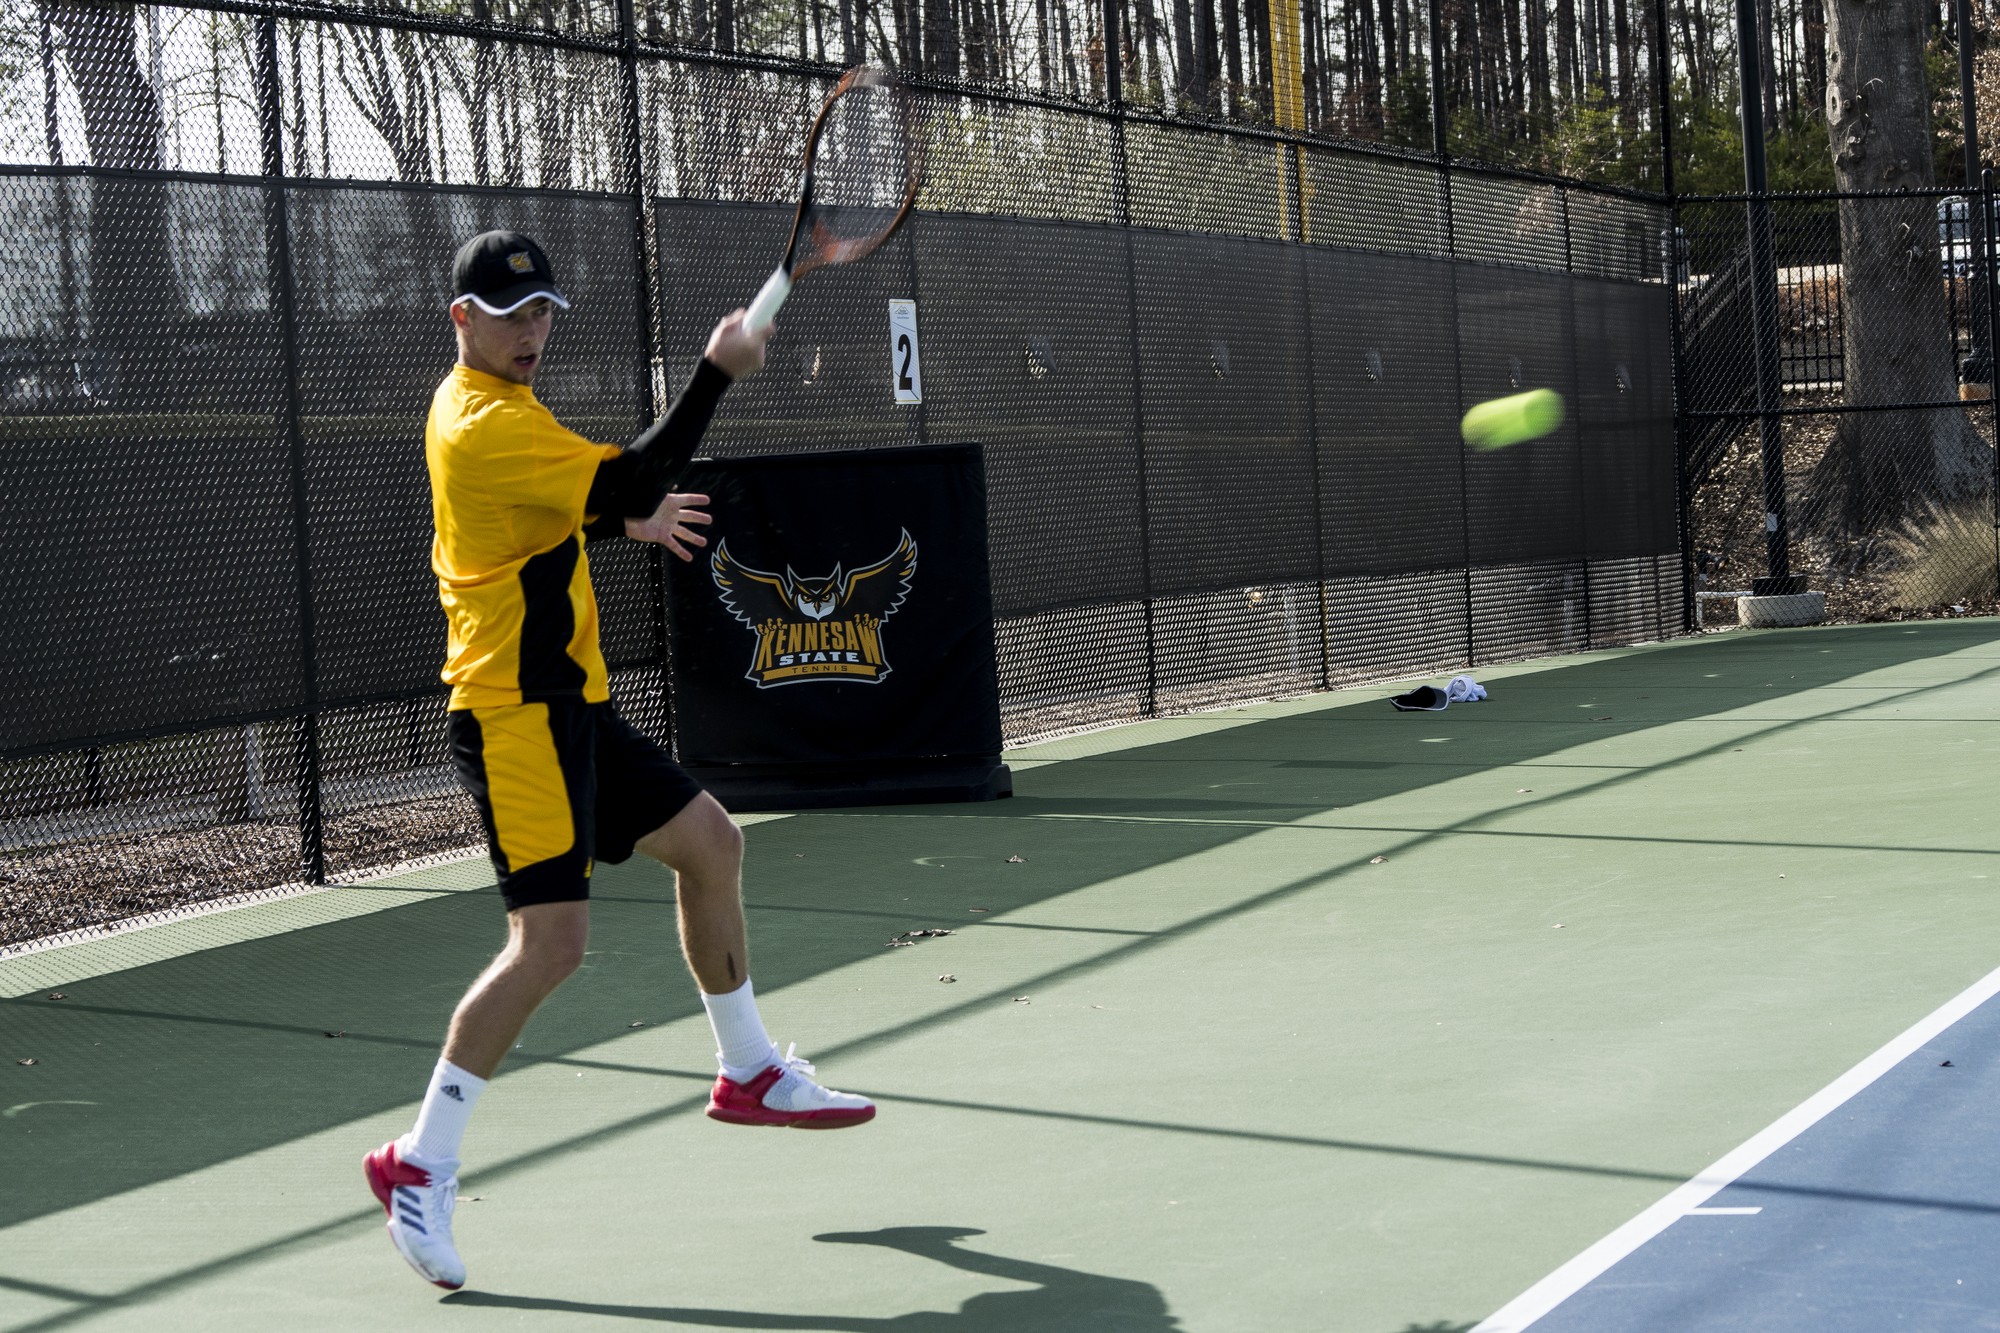 KSU tennis loses early lead to undefeated team